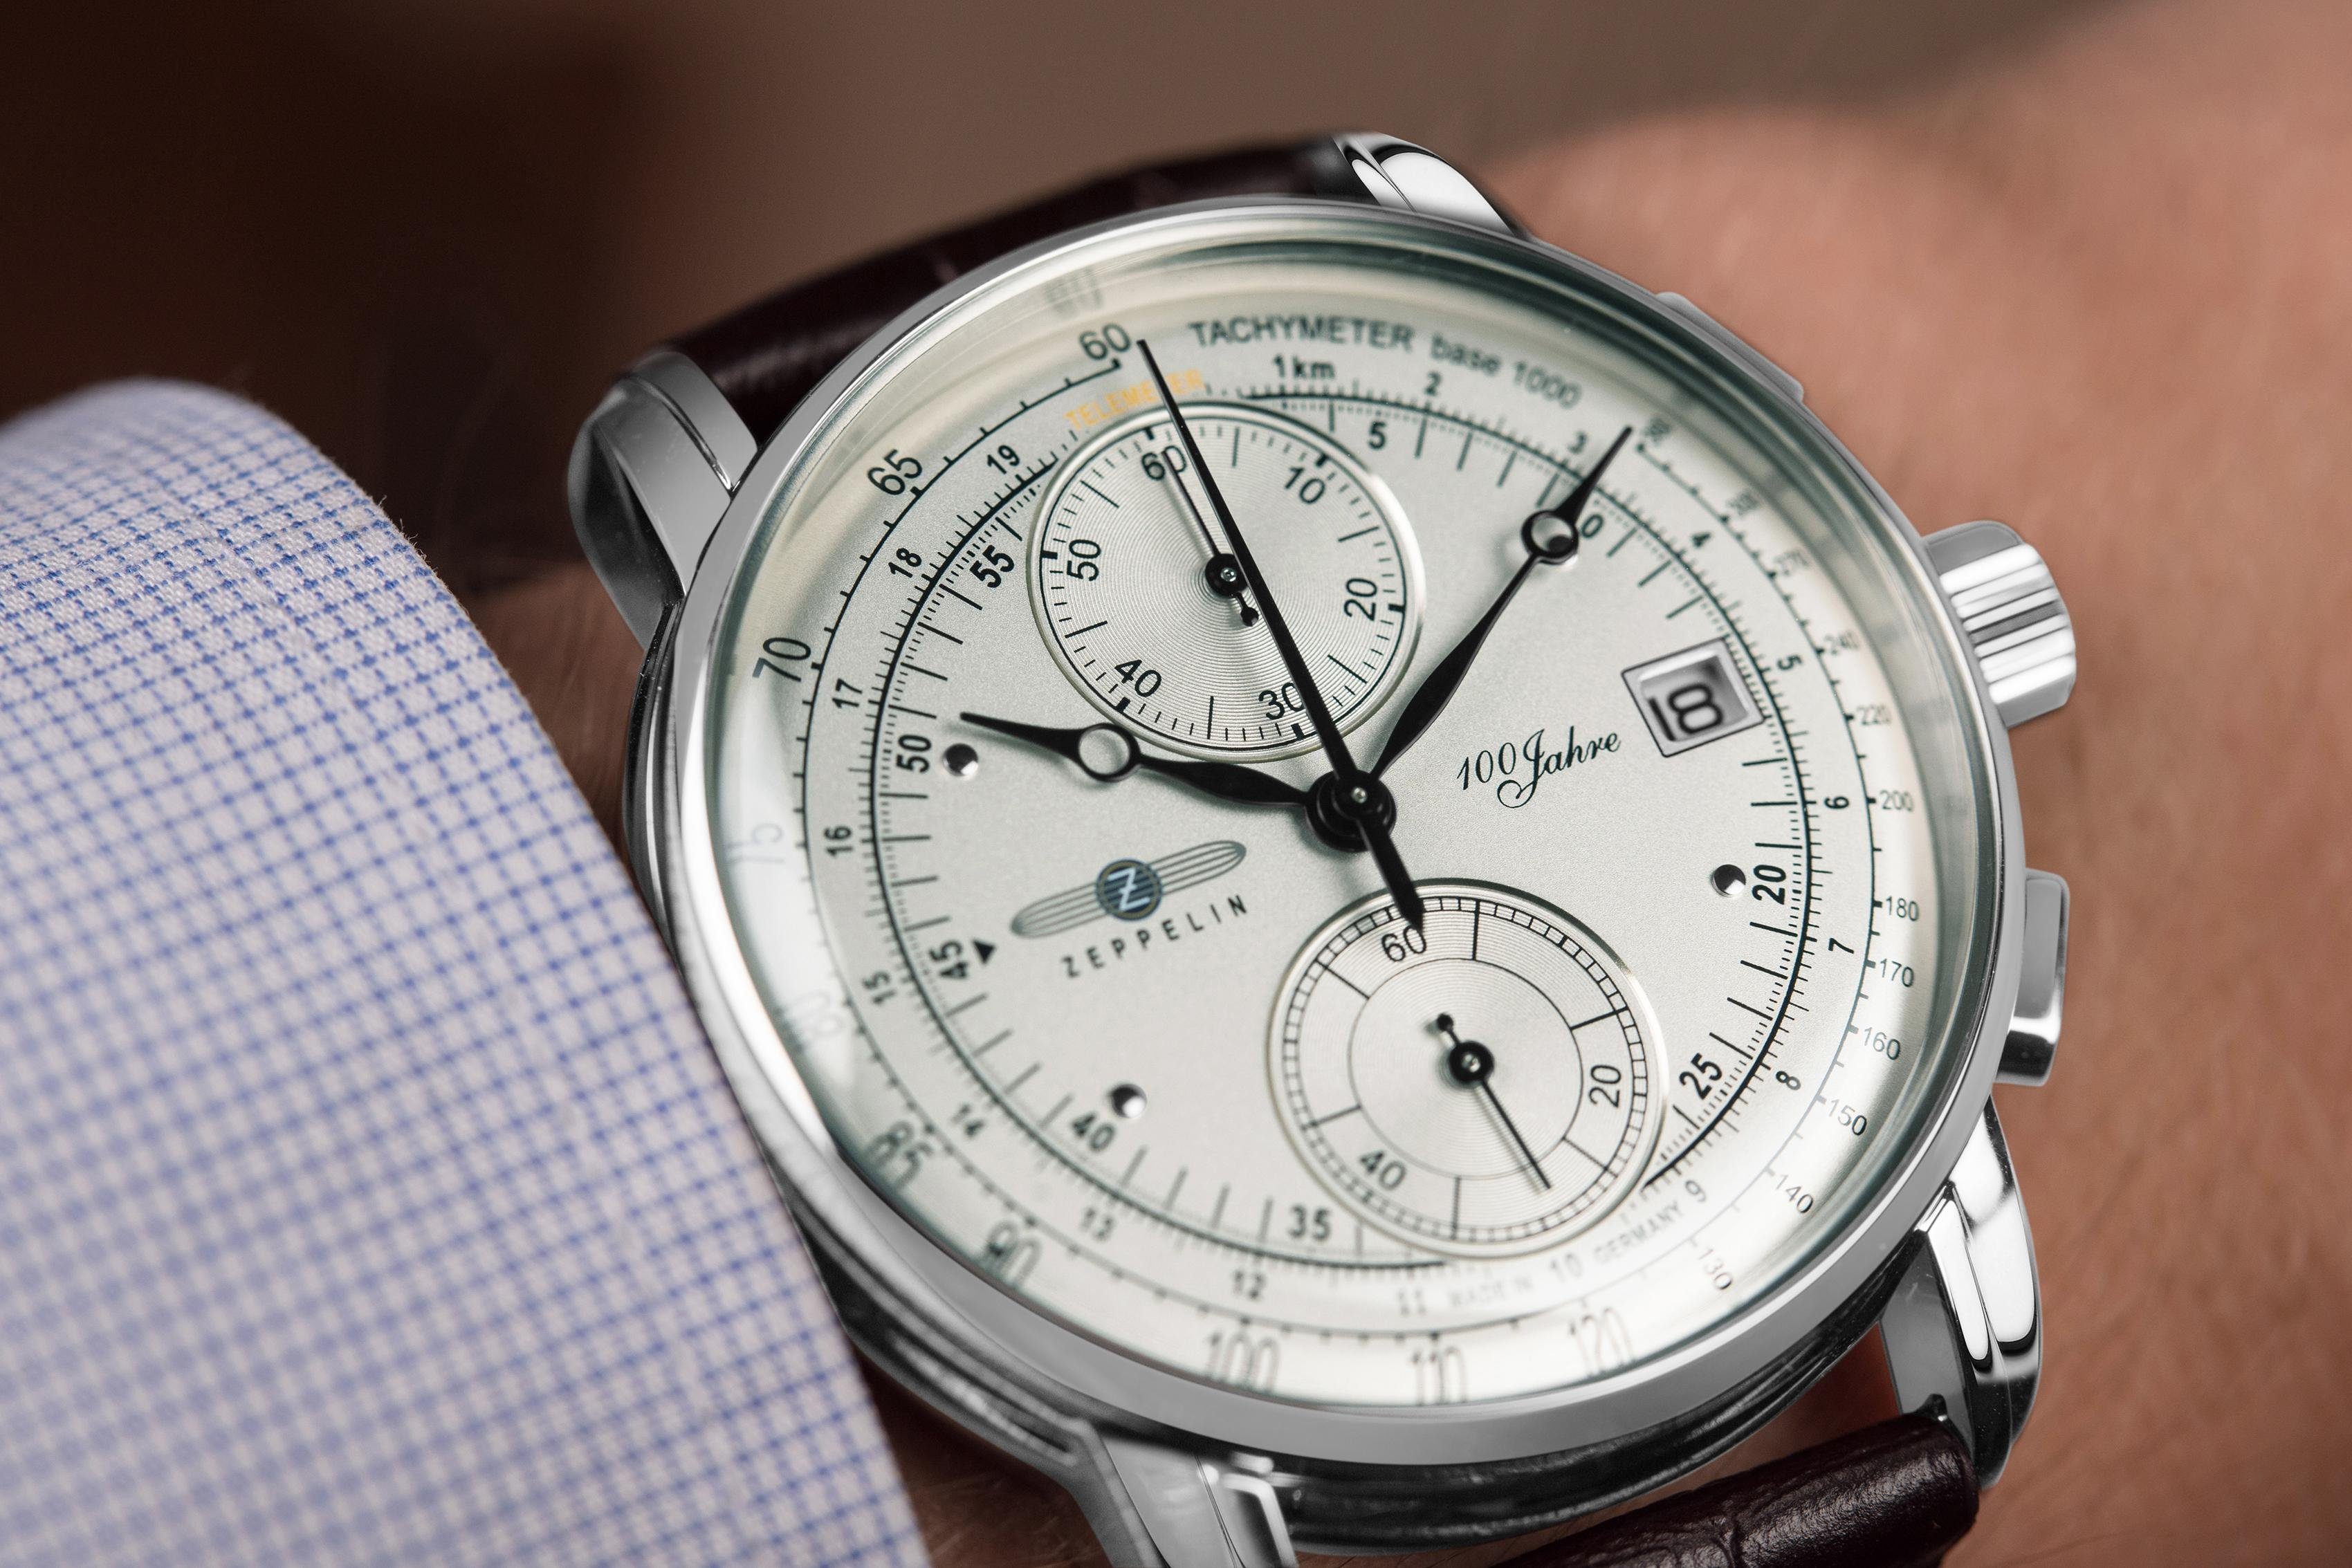 Chronograph Germany made in ZEPPELIN 86701, Zeppelin, Jahre 100